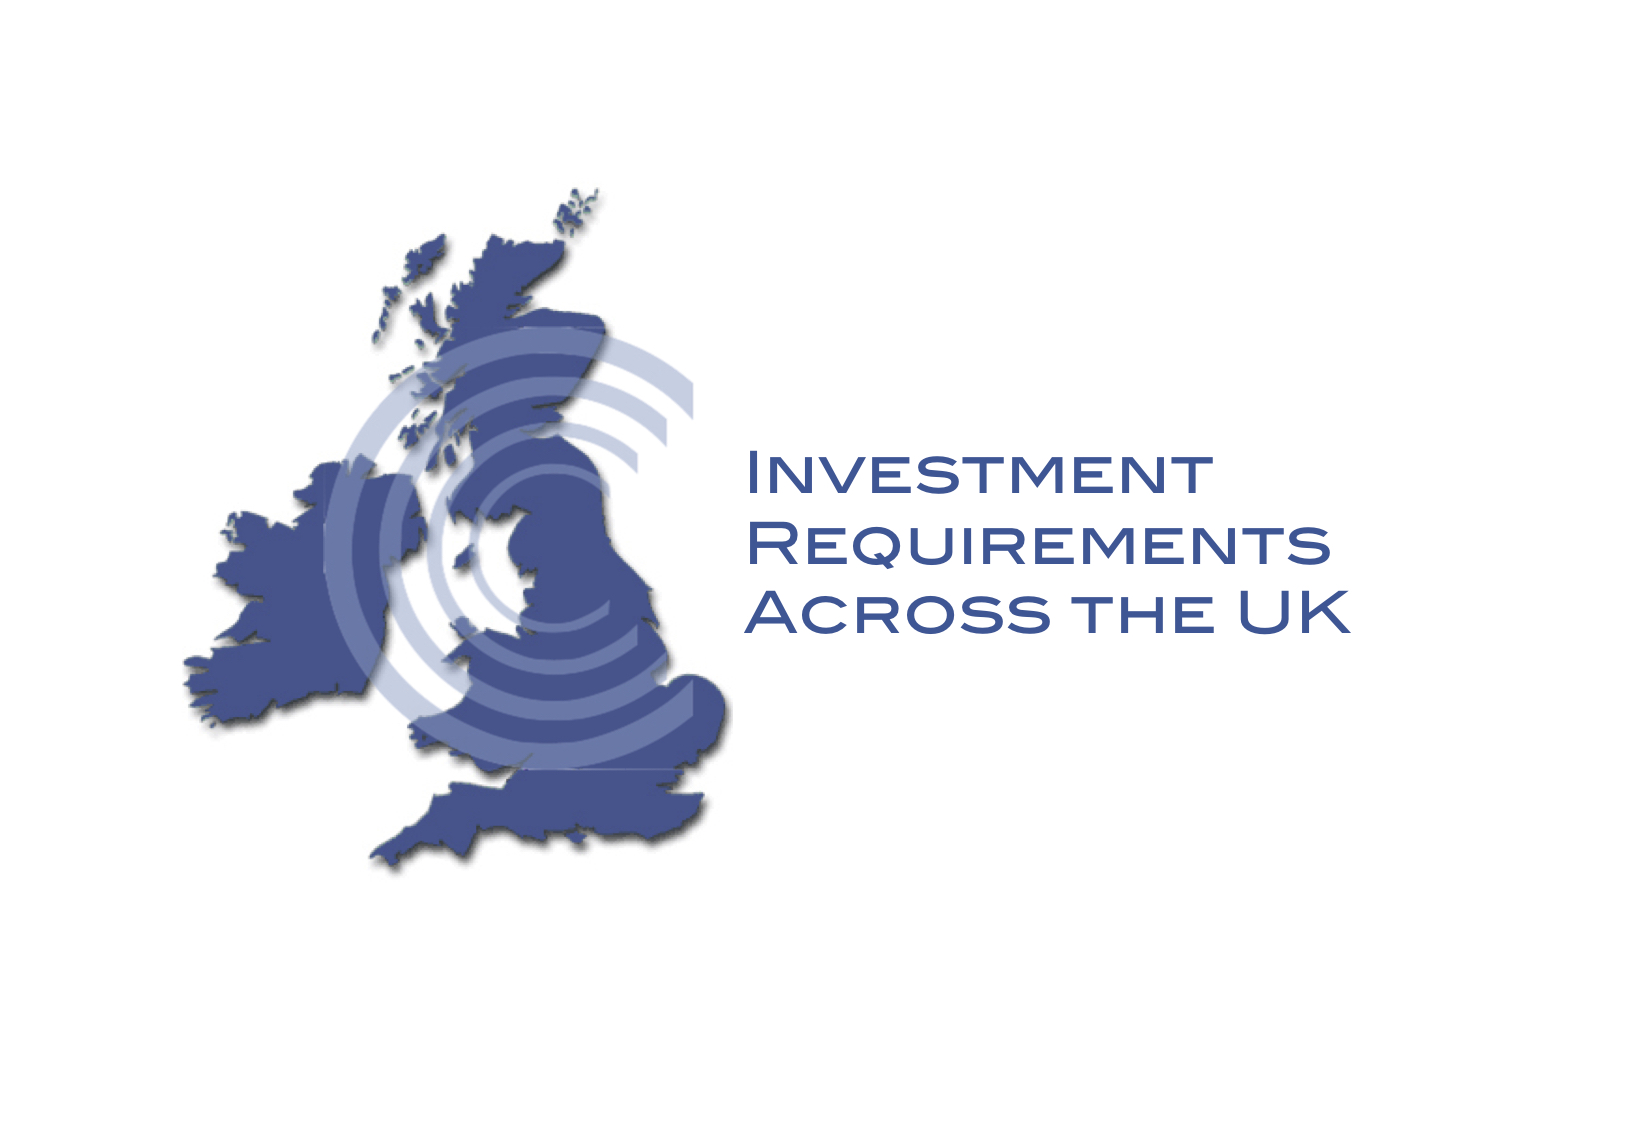 Investment Requirements across the UK